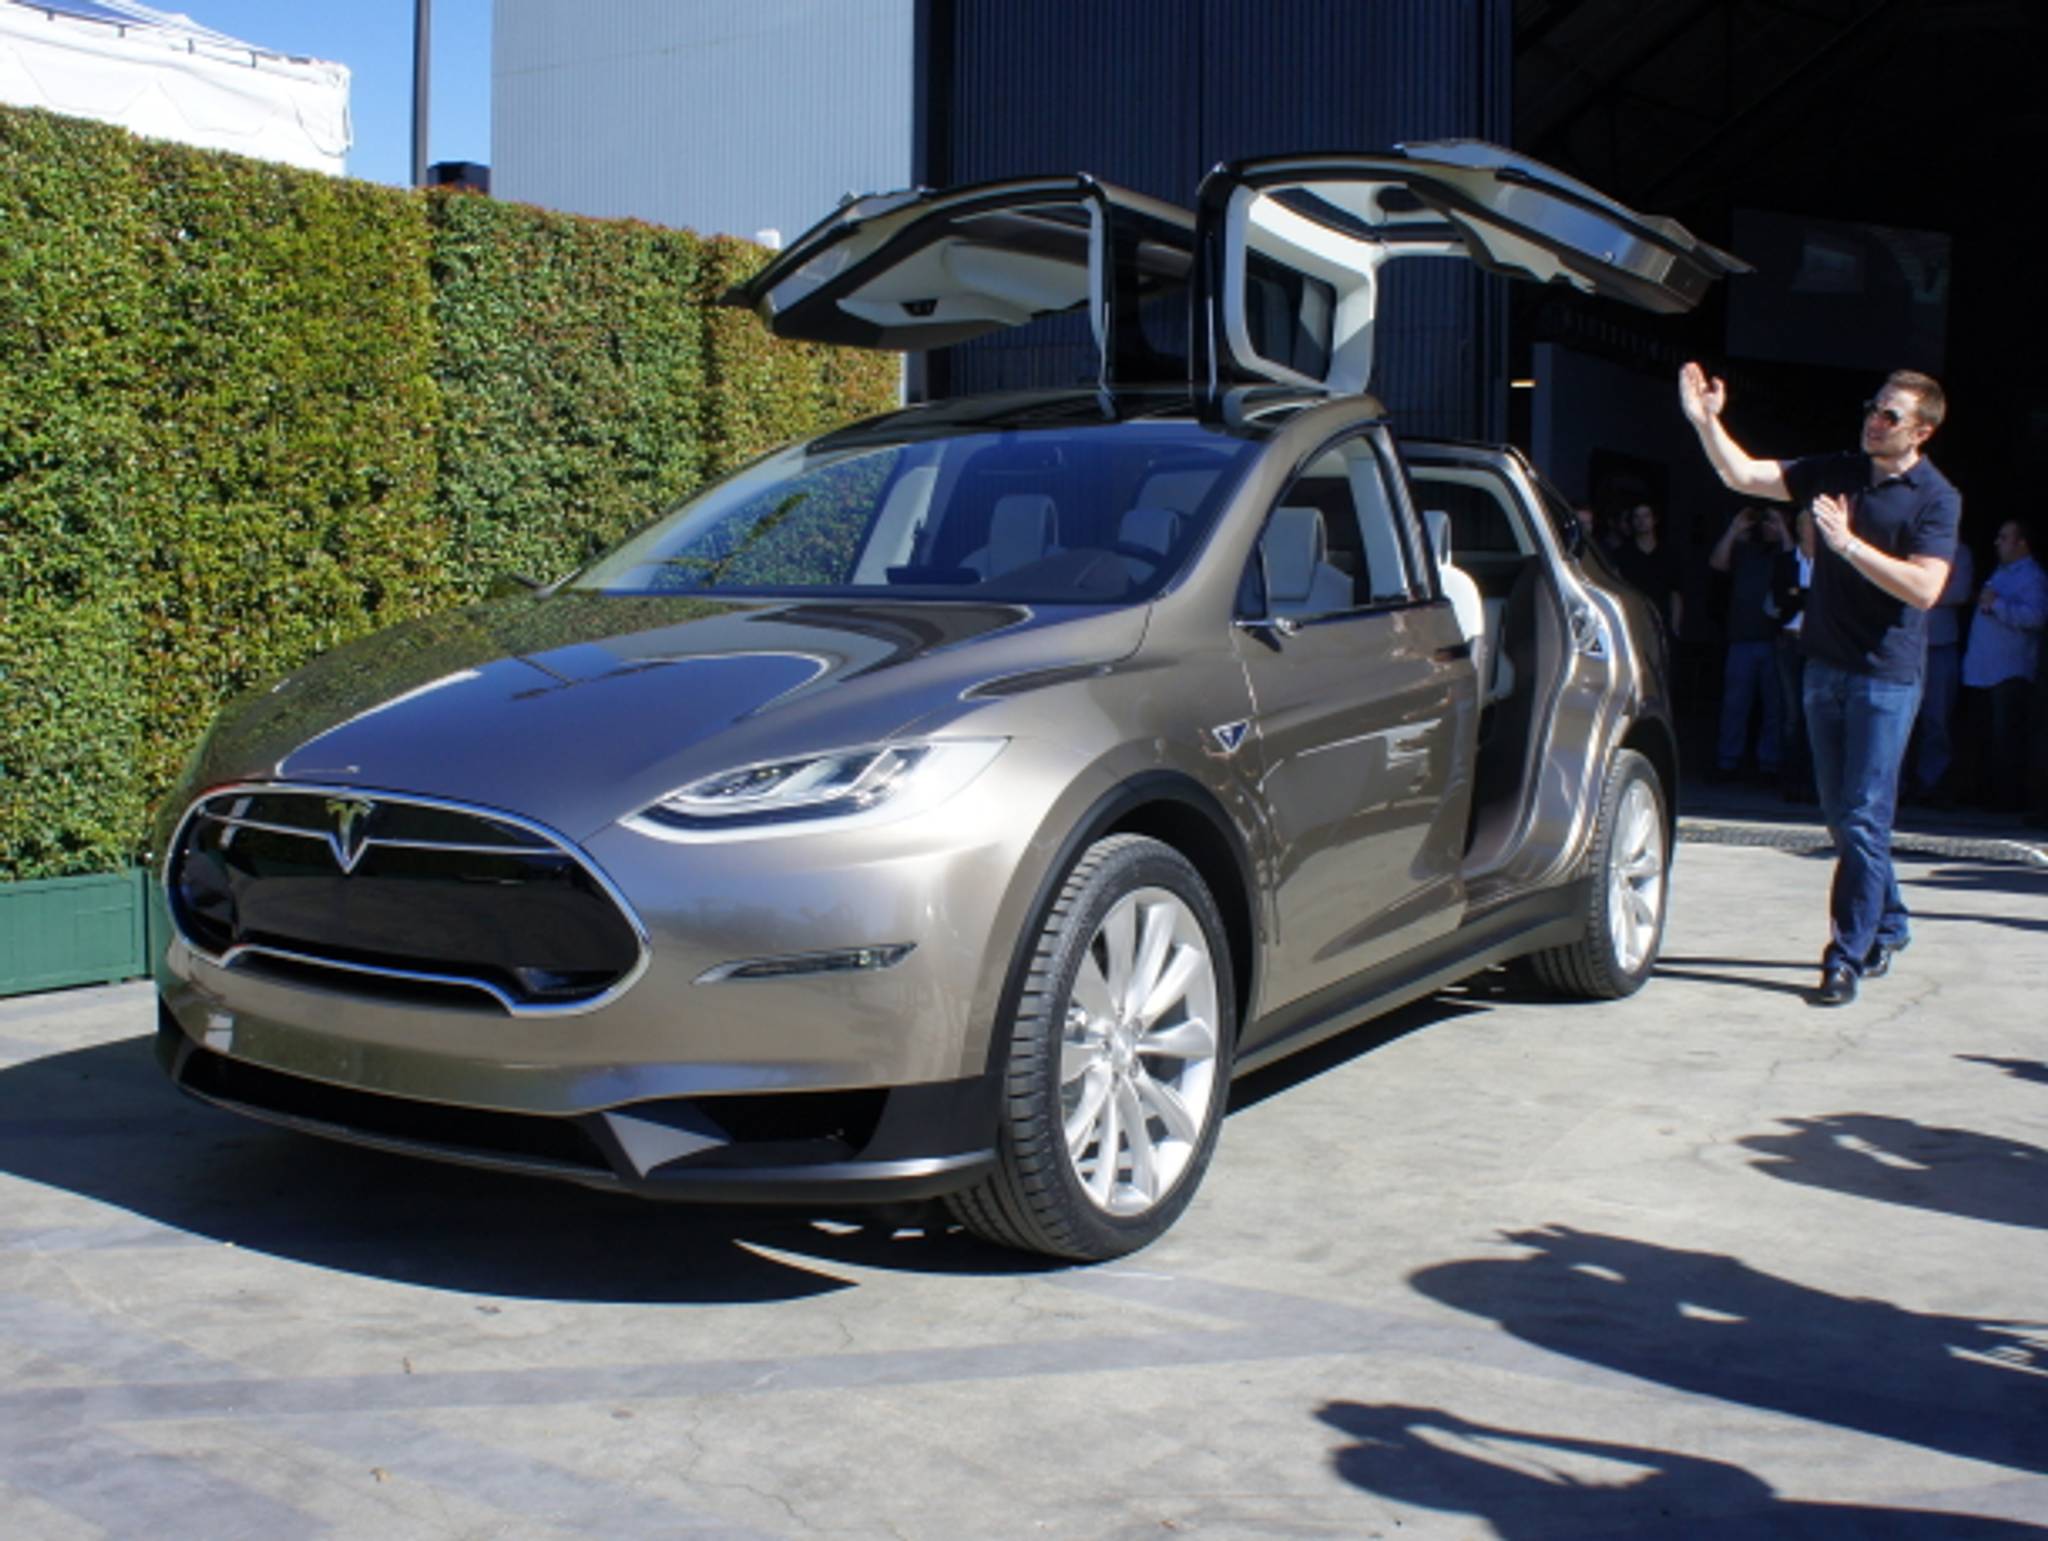 Tesla gears up to launch a family-friendly SUV